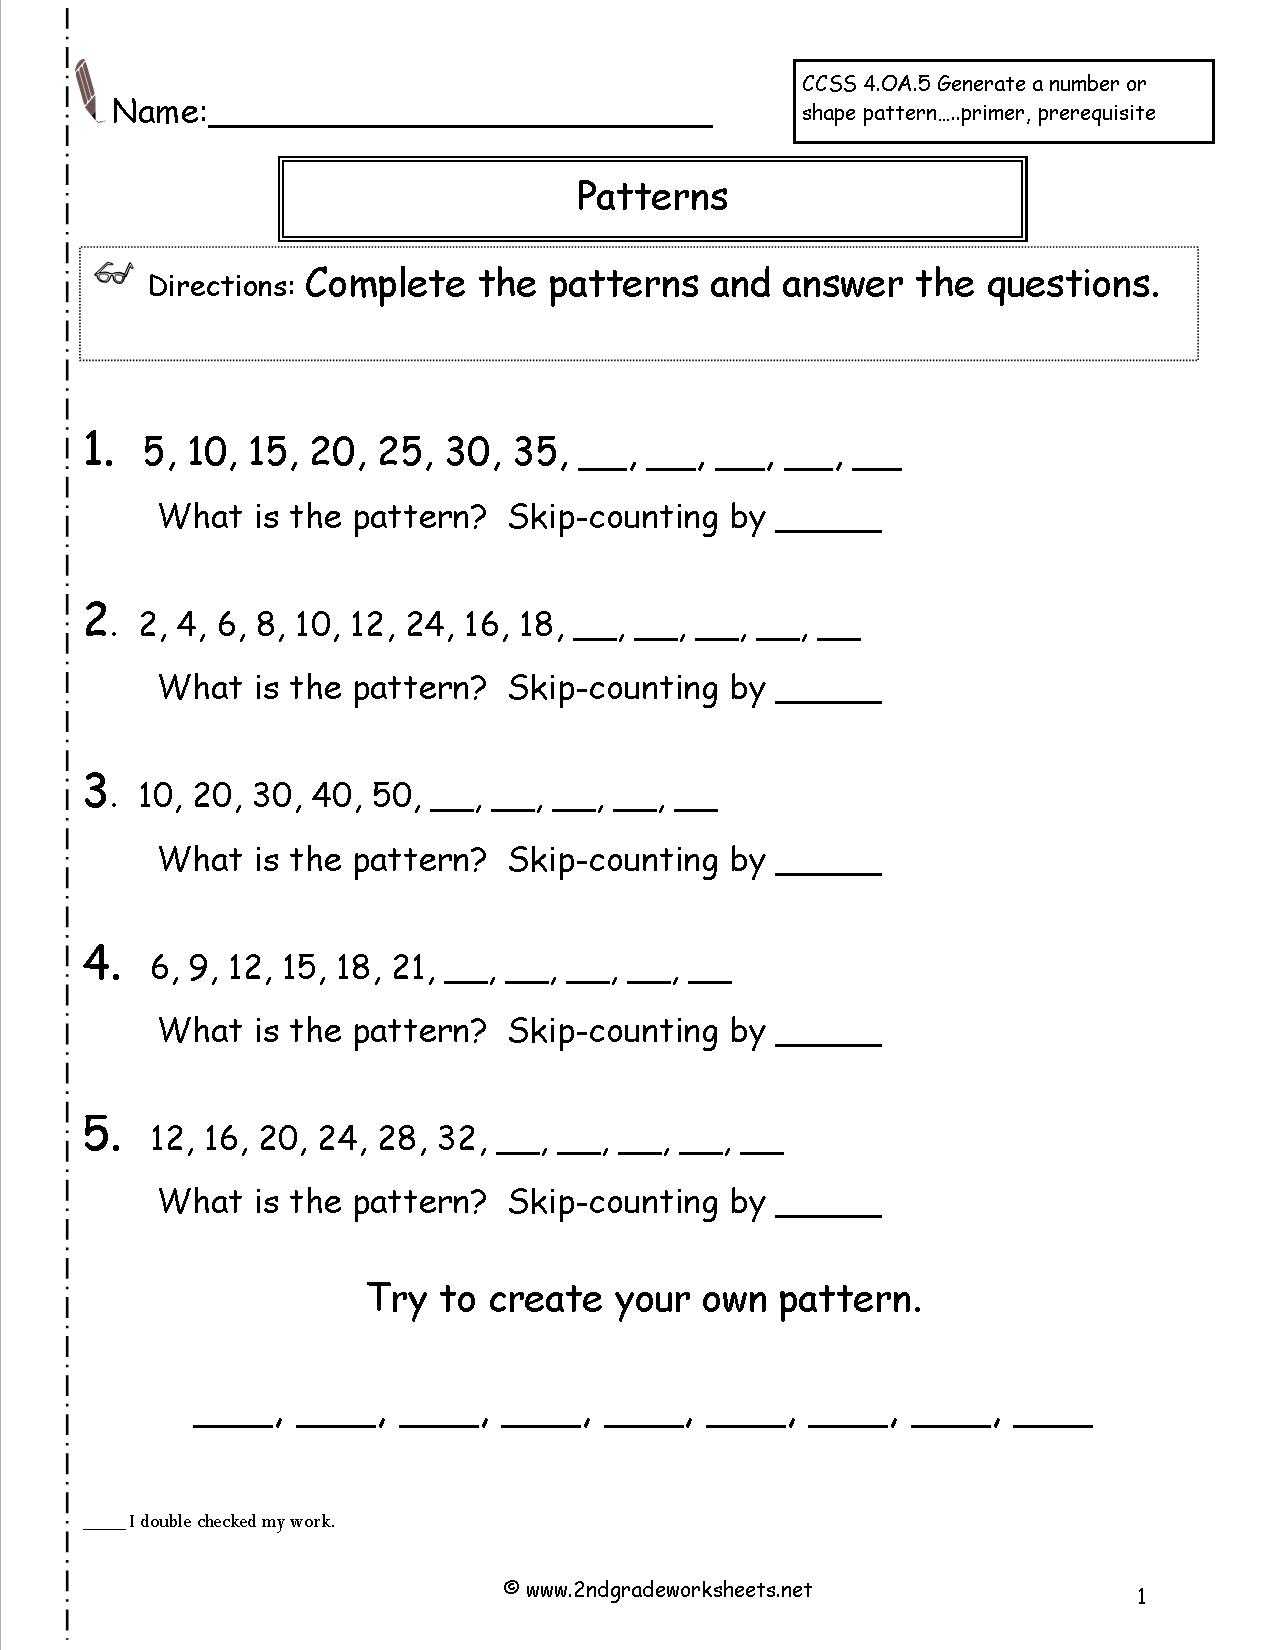 Arithmetic Sequence Worksheet Pdf together with Collection Of Second Grade Math Worksheets Number Patterns